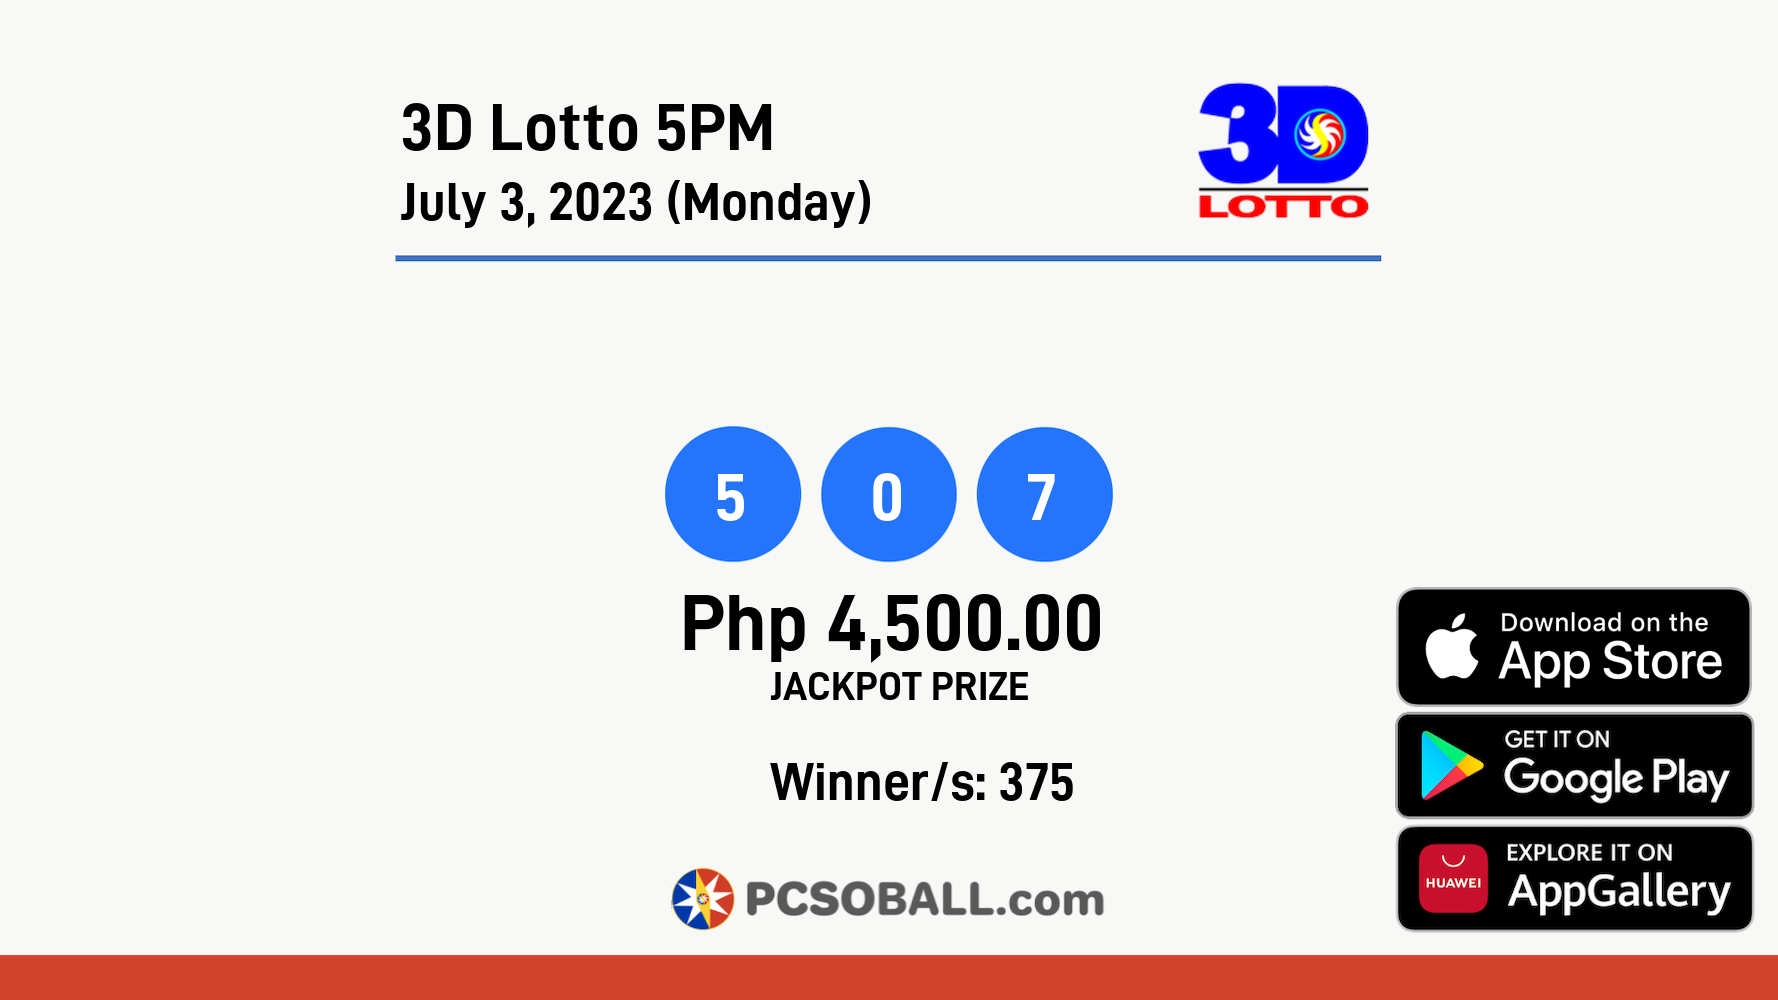 3D Lotto 5PM July 3, 2023 (Monday) Result